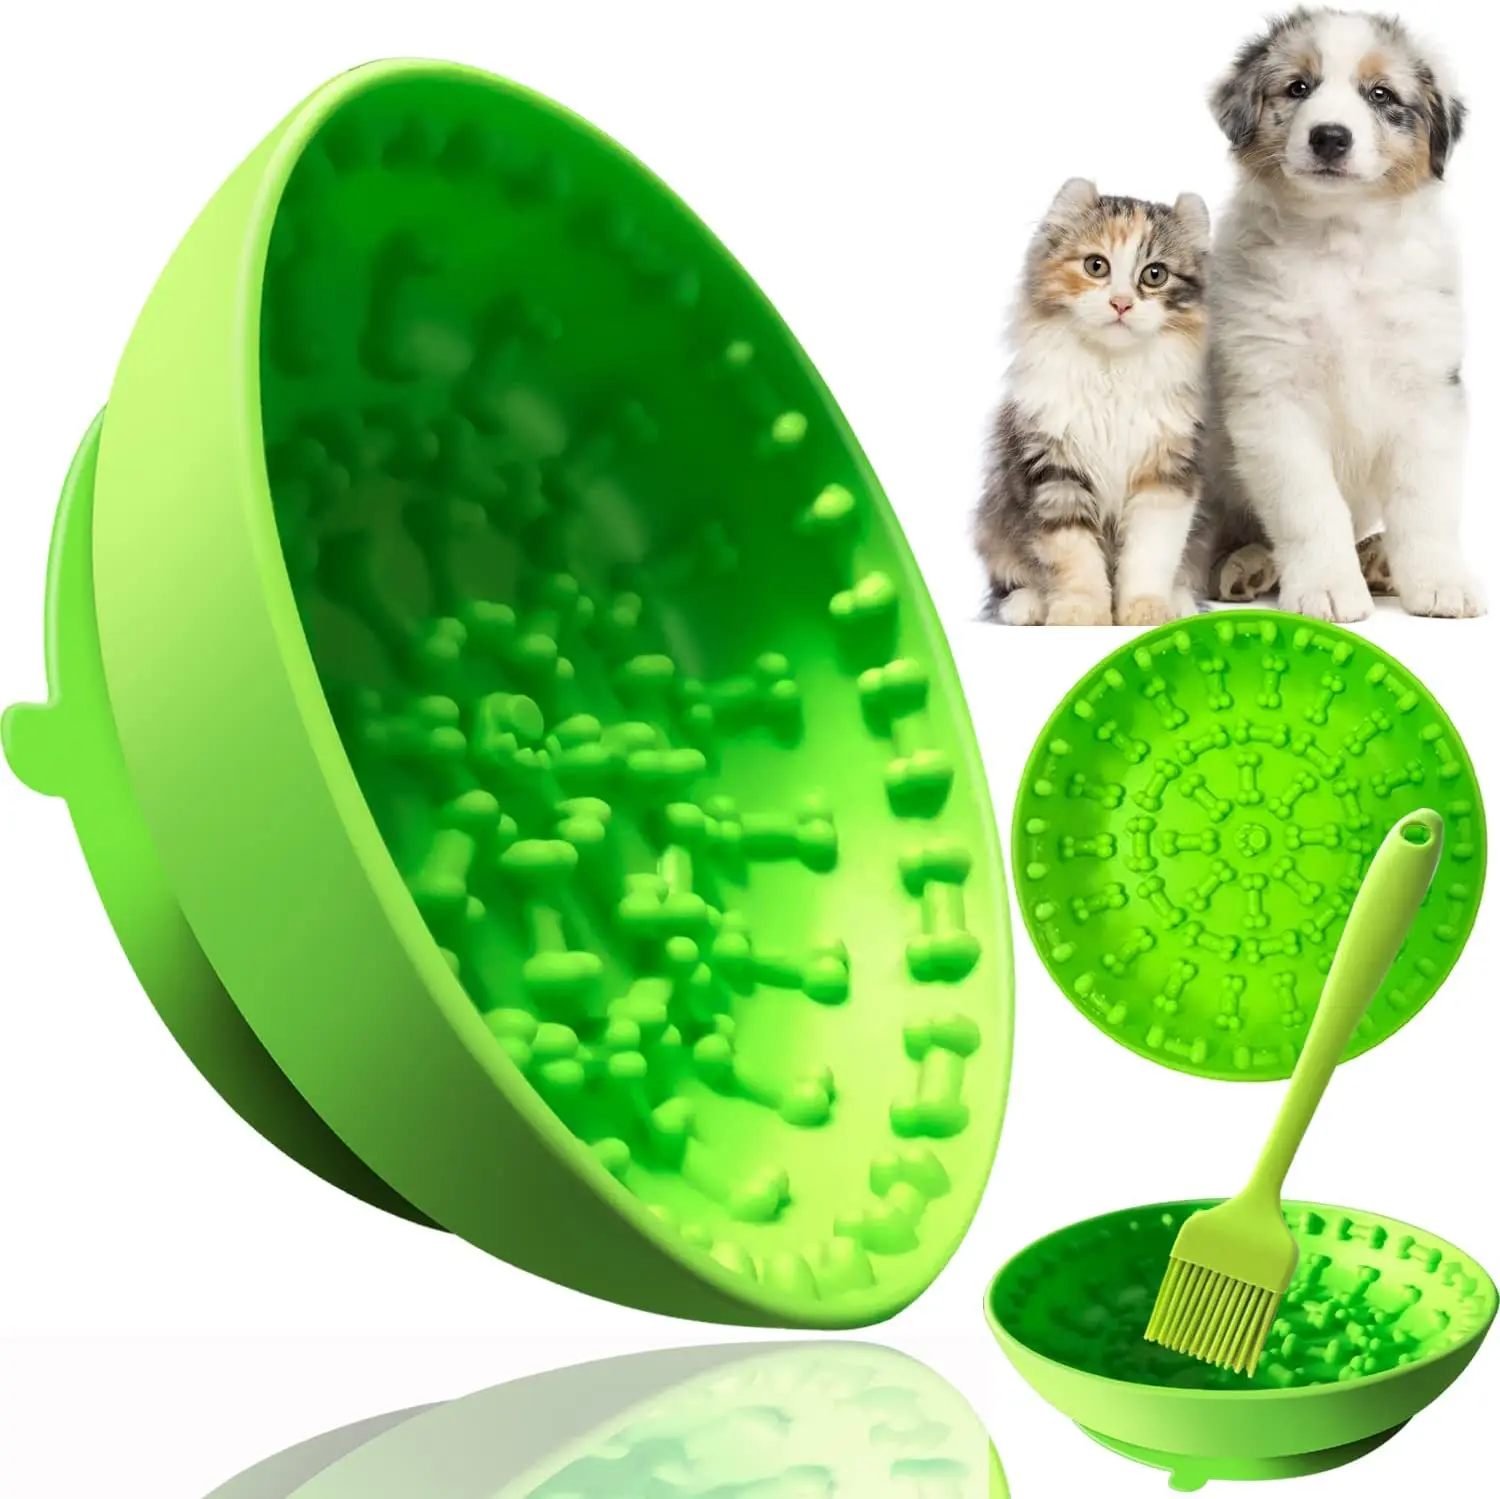 

ATUBAN Lick Bowl for Dogs Cat Slow Feeder Bowl for Pets Health Eat,Lick Mat Bowl for Wet or Dry Food,Yogurt,Peanut Butter